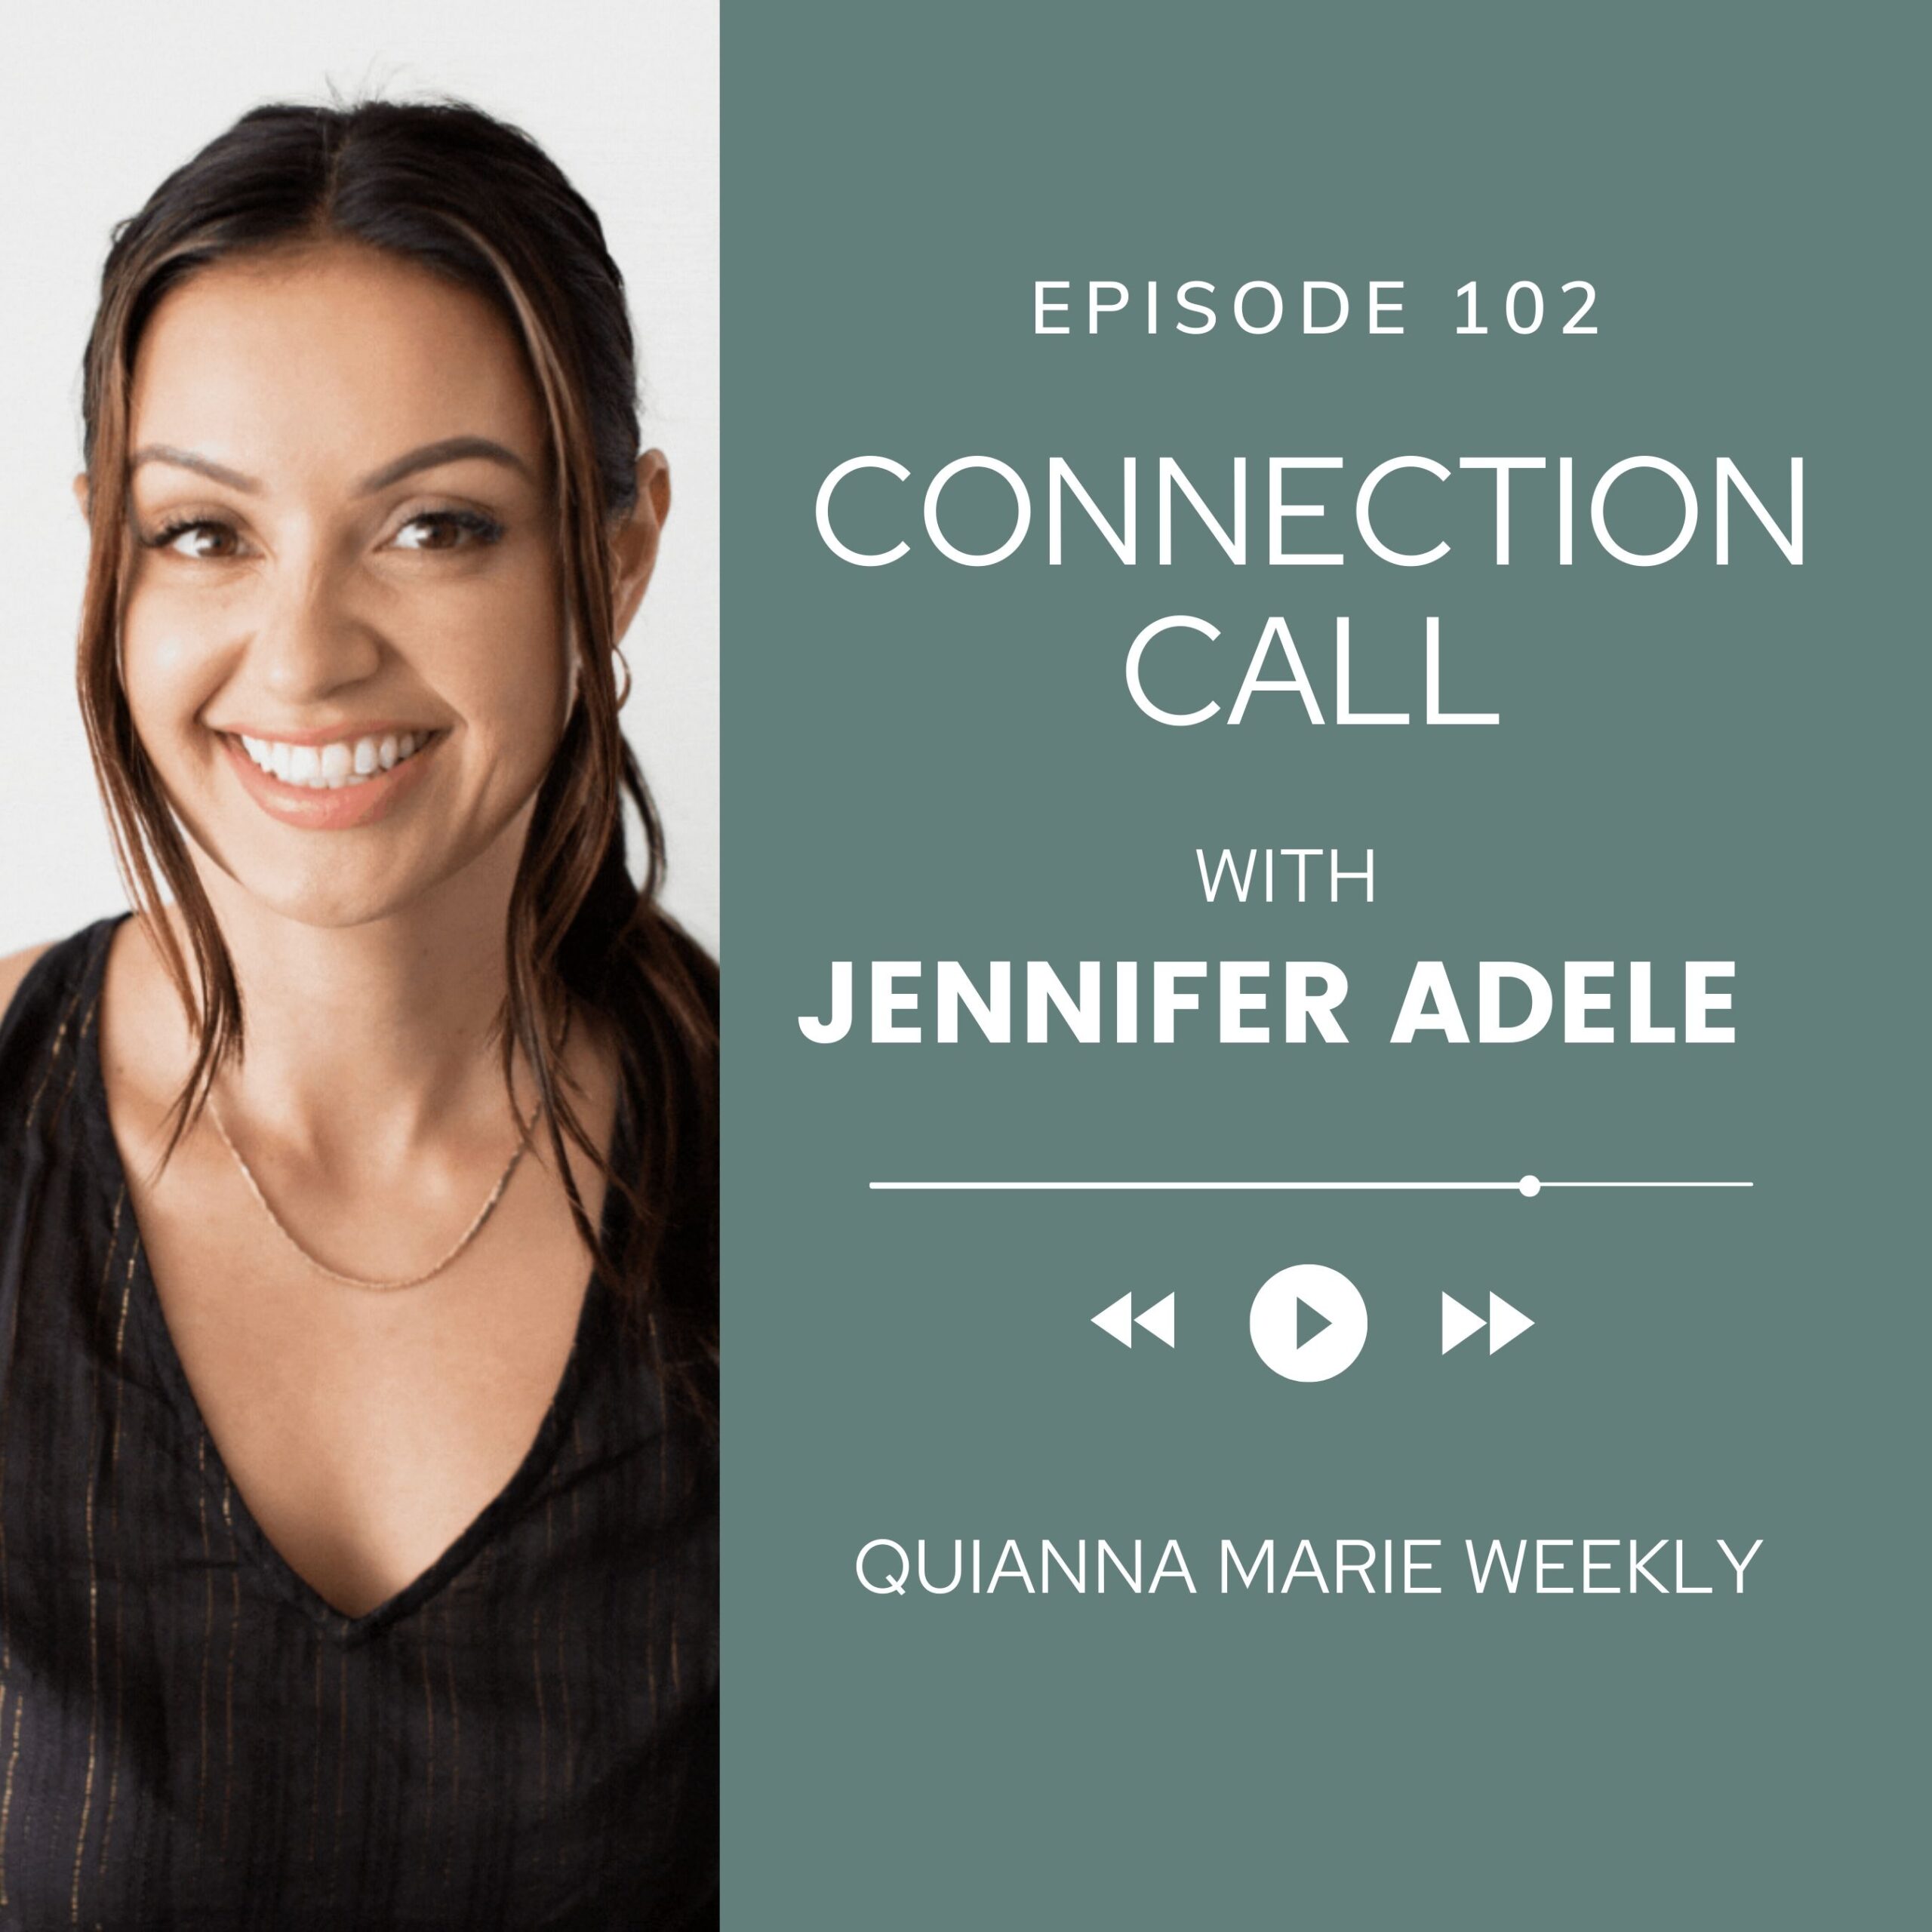 Connection Call with Jennifer Adele and Quianna Marie